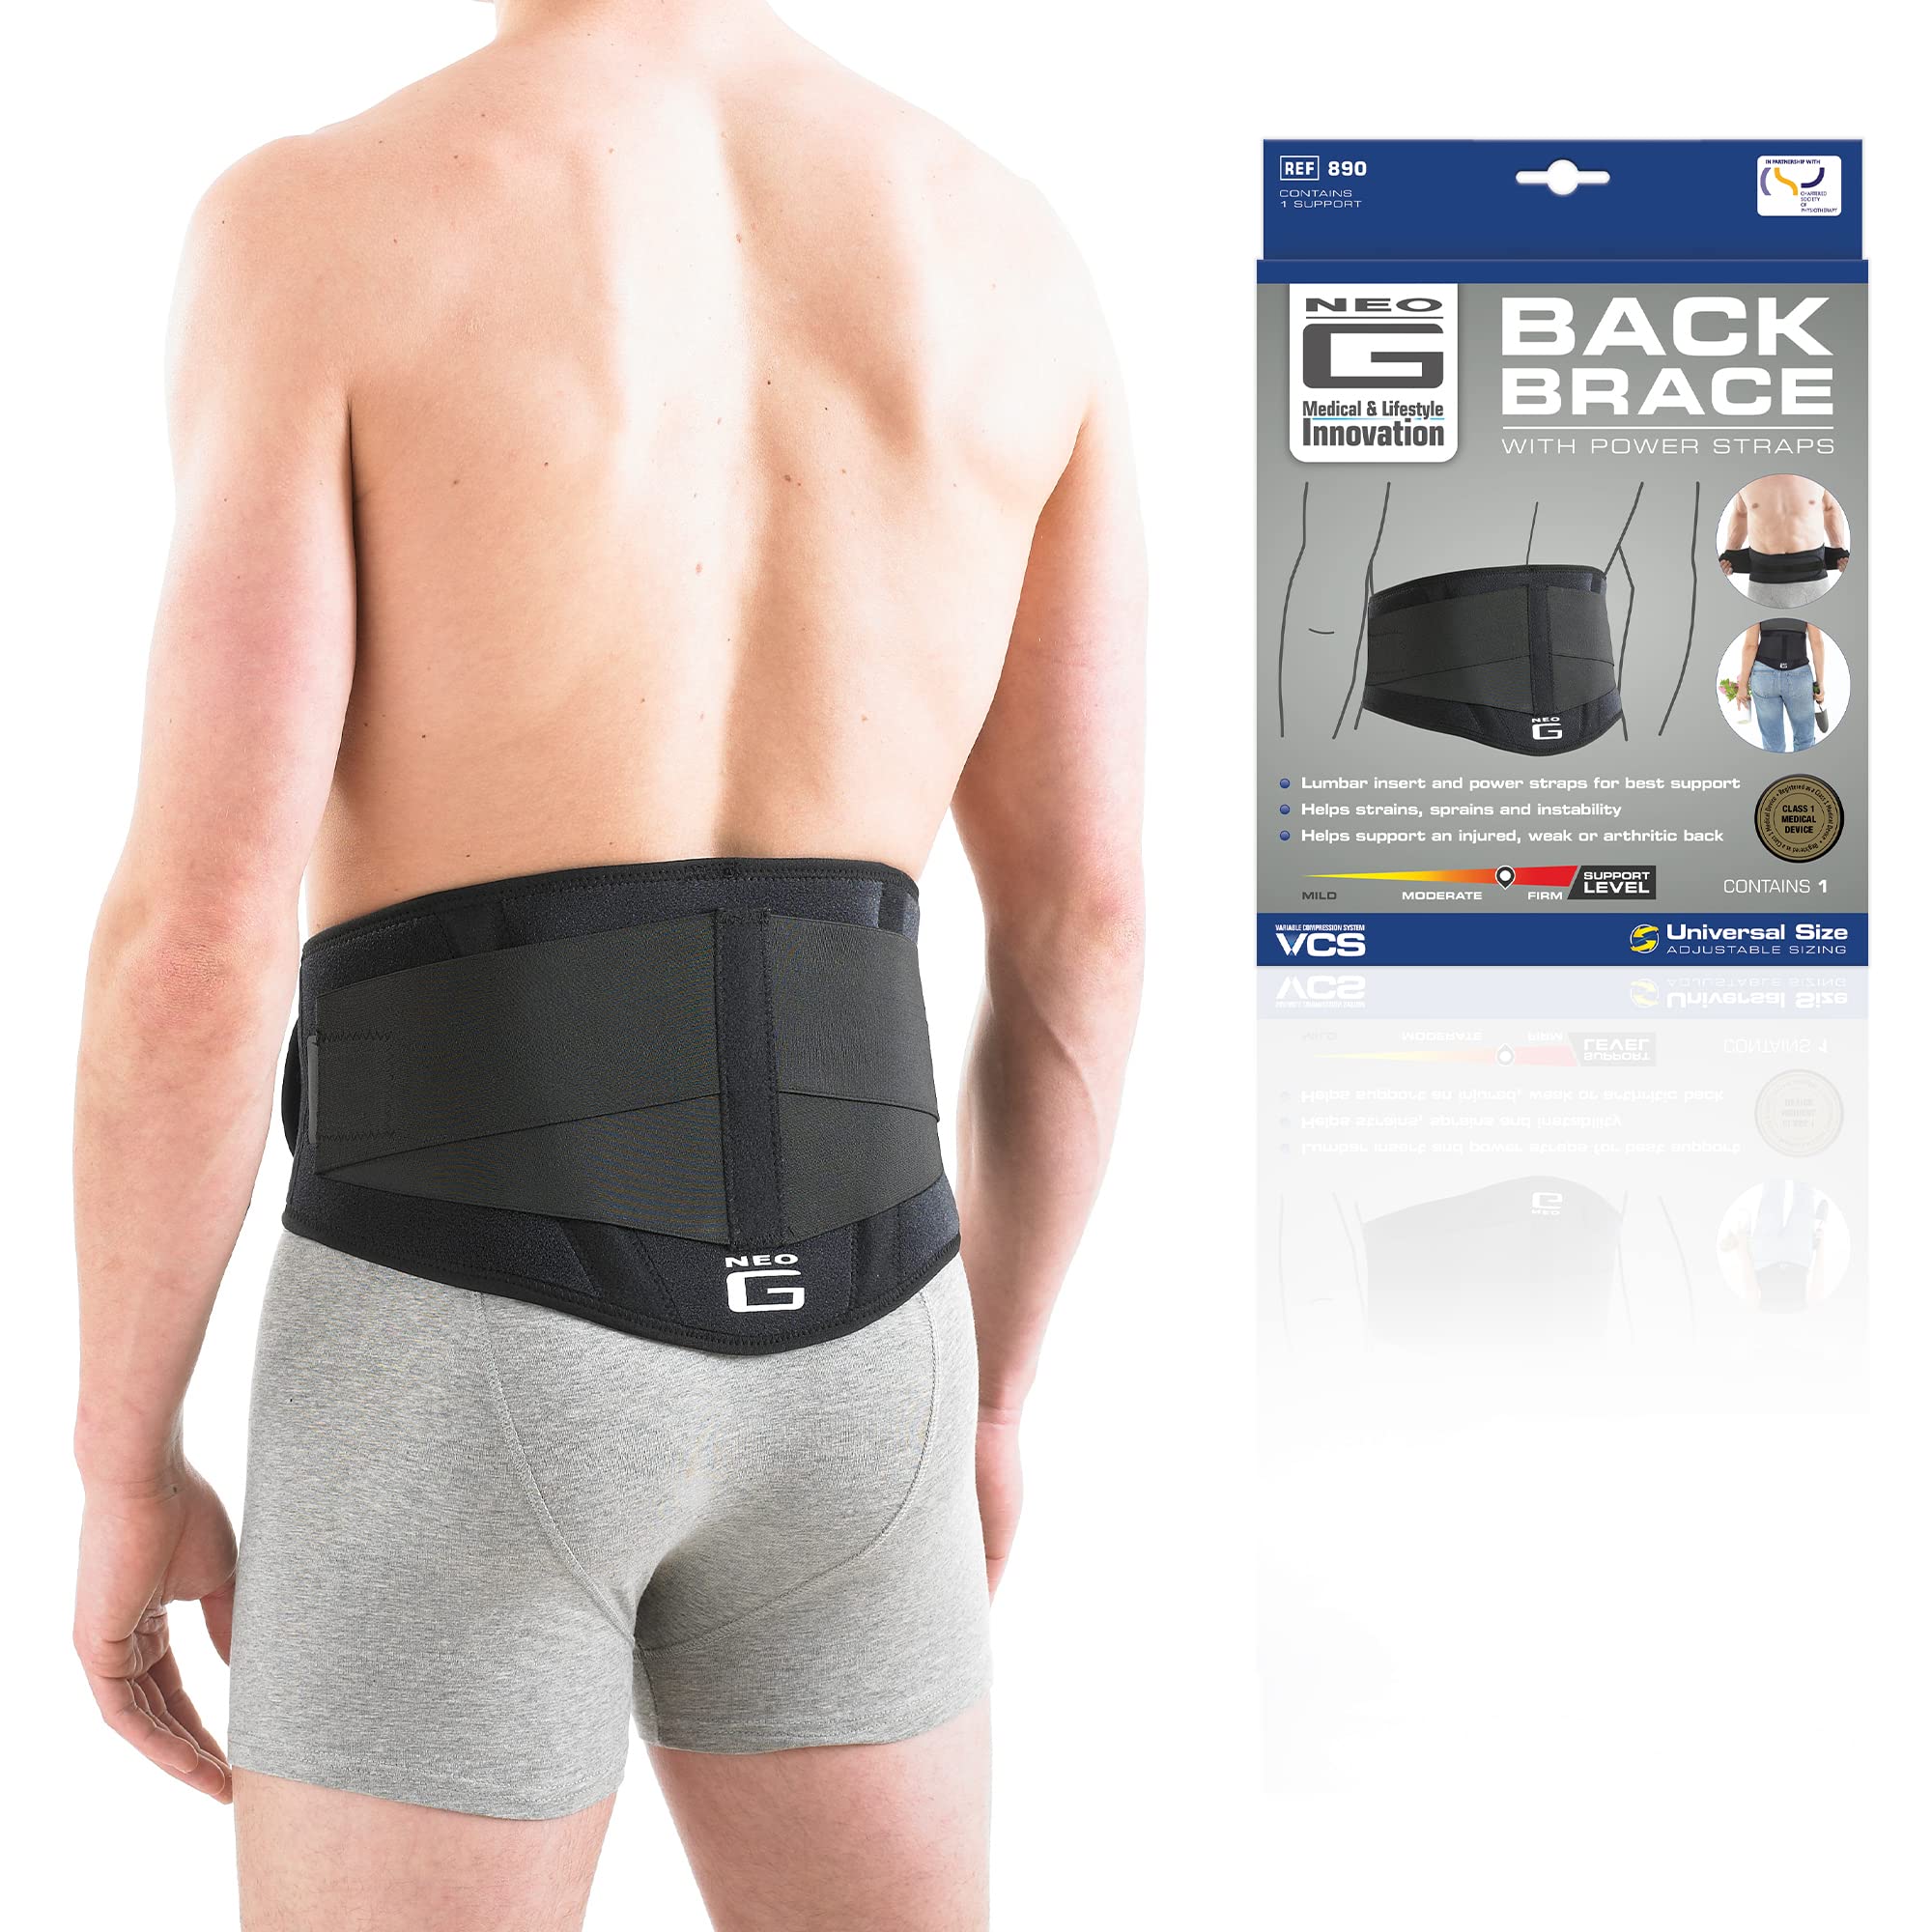 Neo G Back Brace with Power Straps - Support For Lower Back Pain